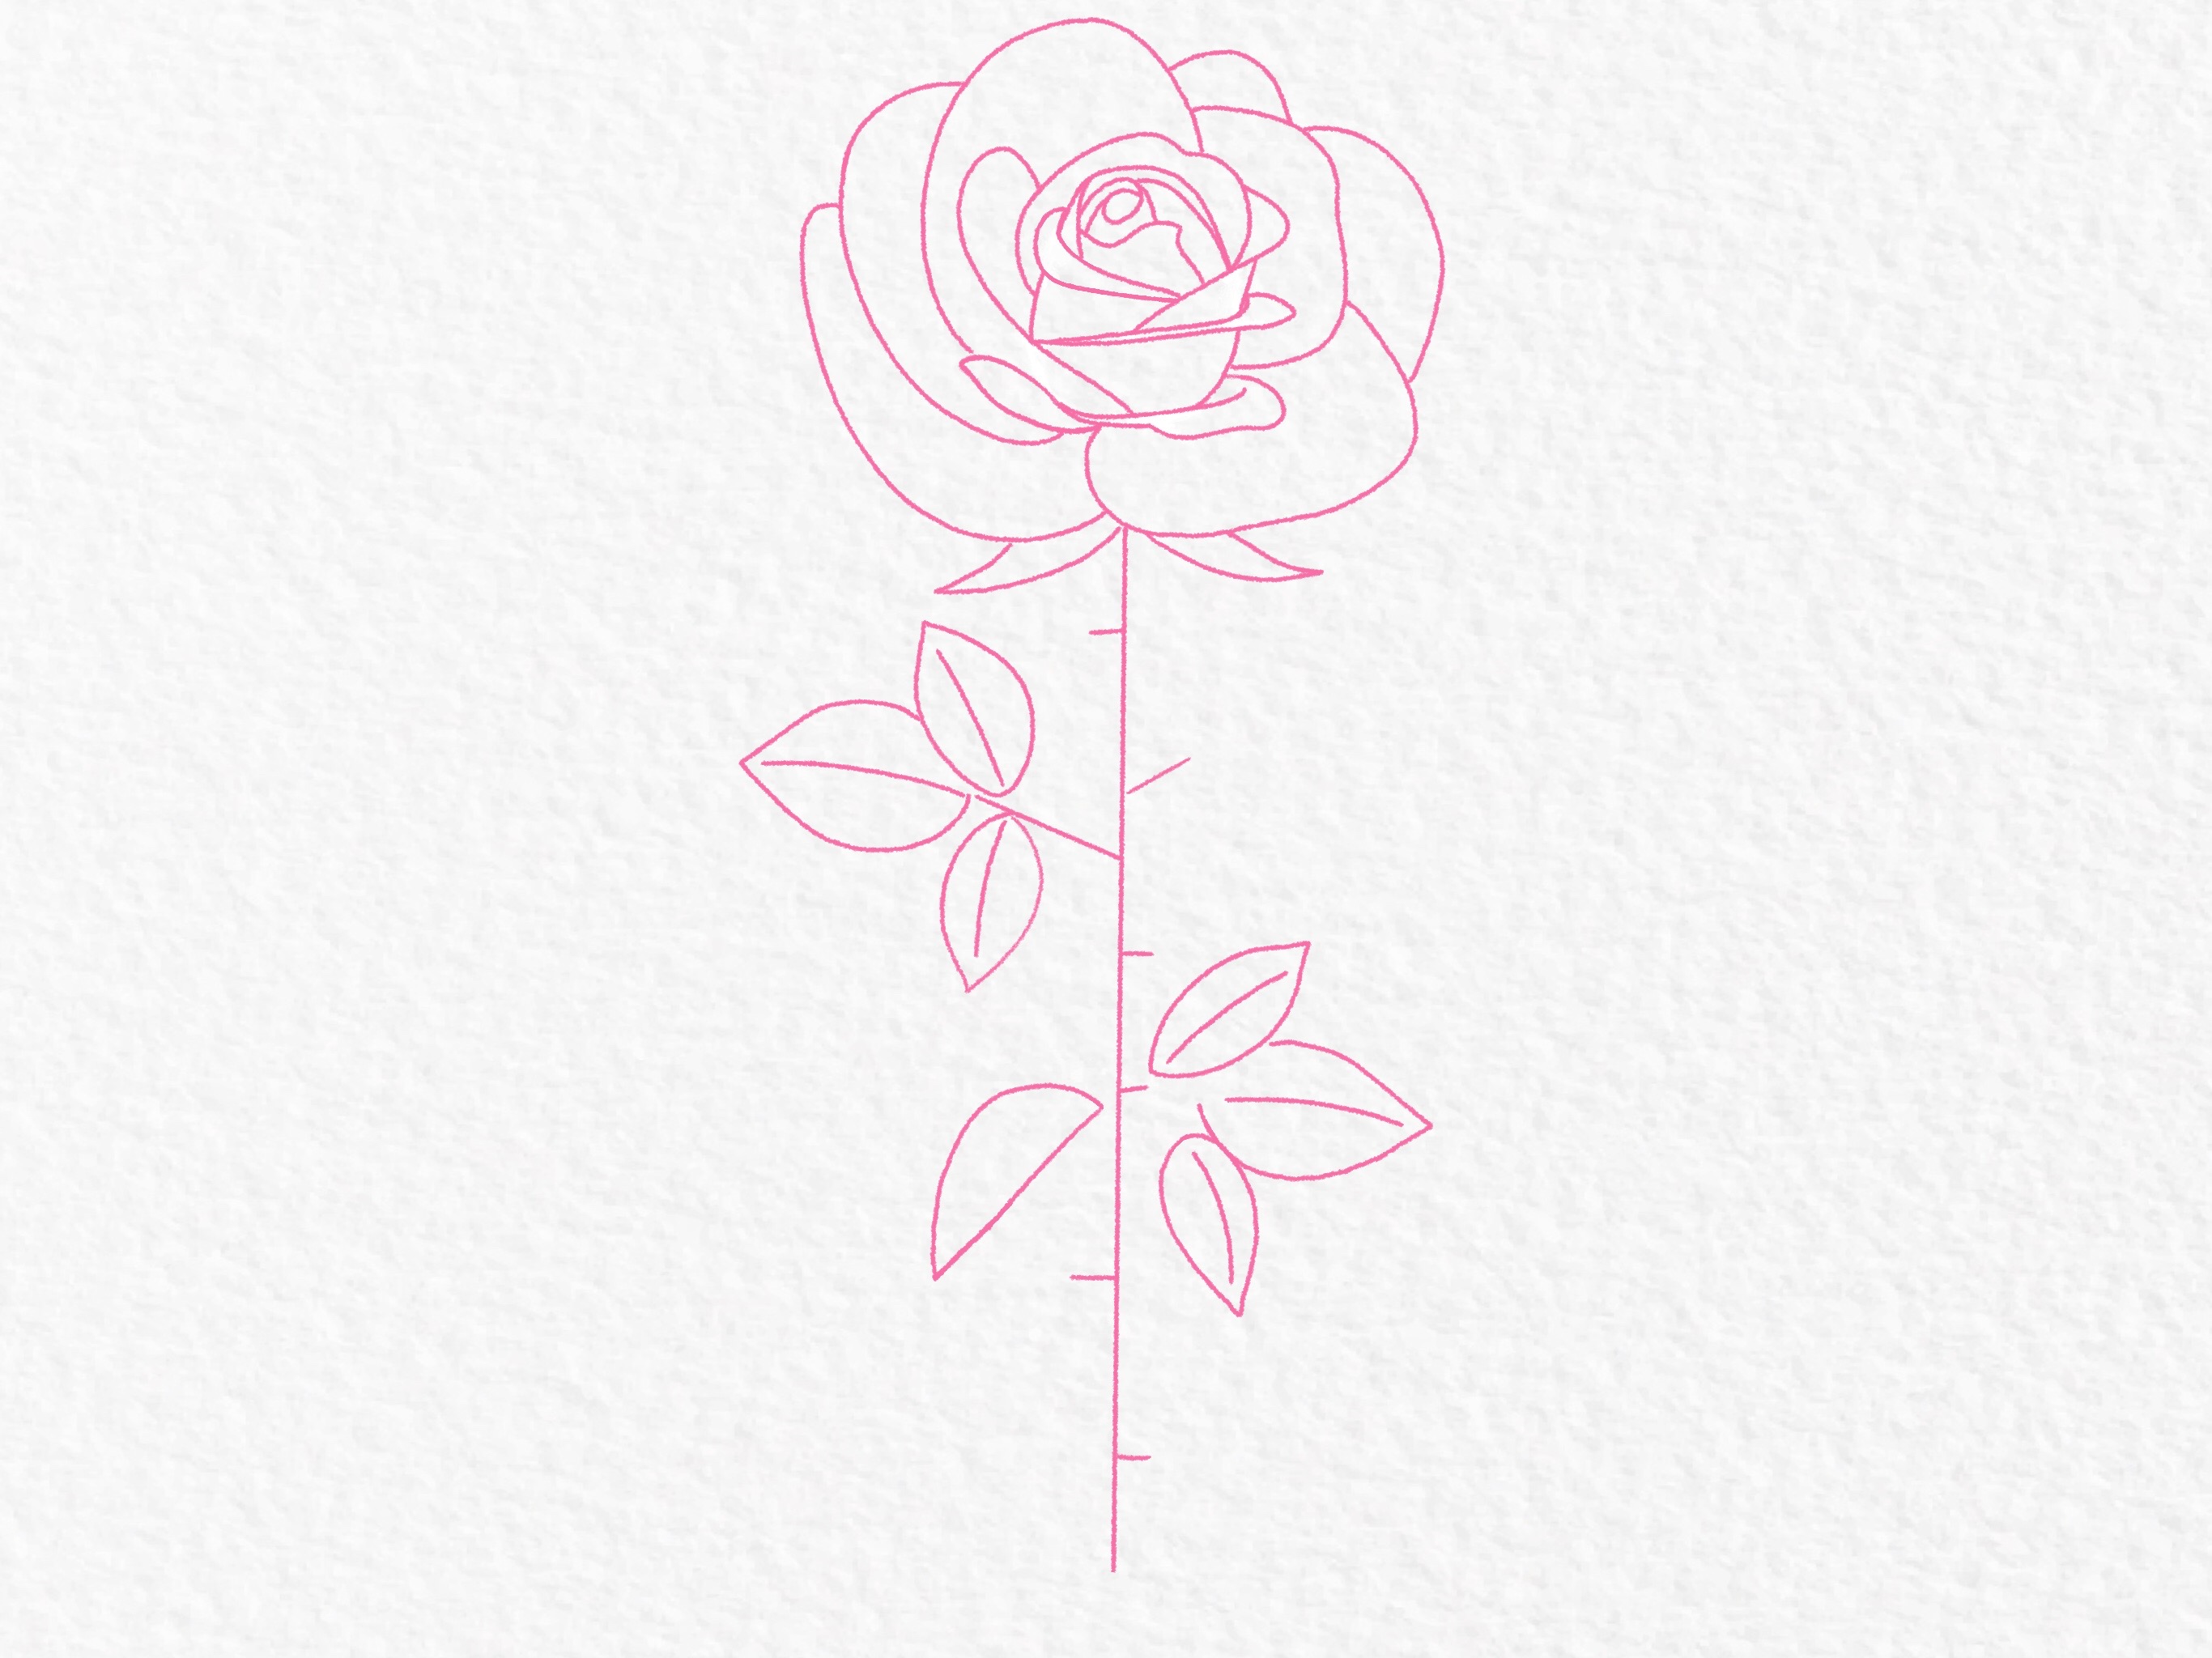 How to draw a rose step by step drawing tutorial step 26 4e41a80